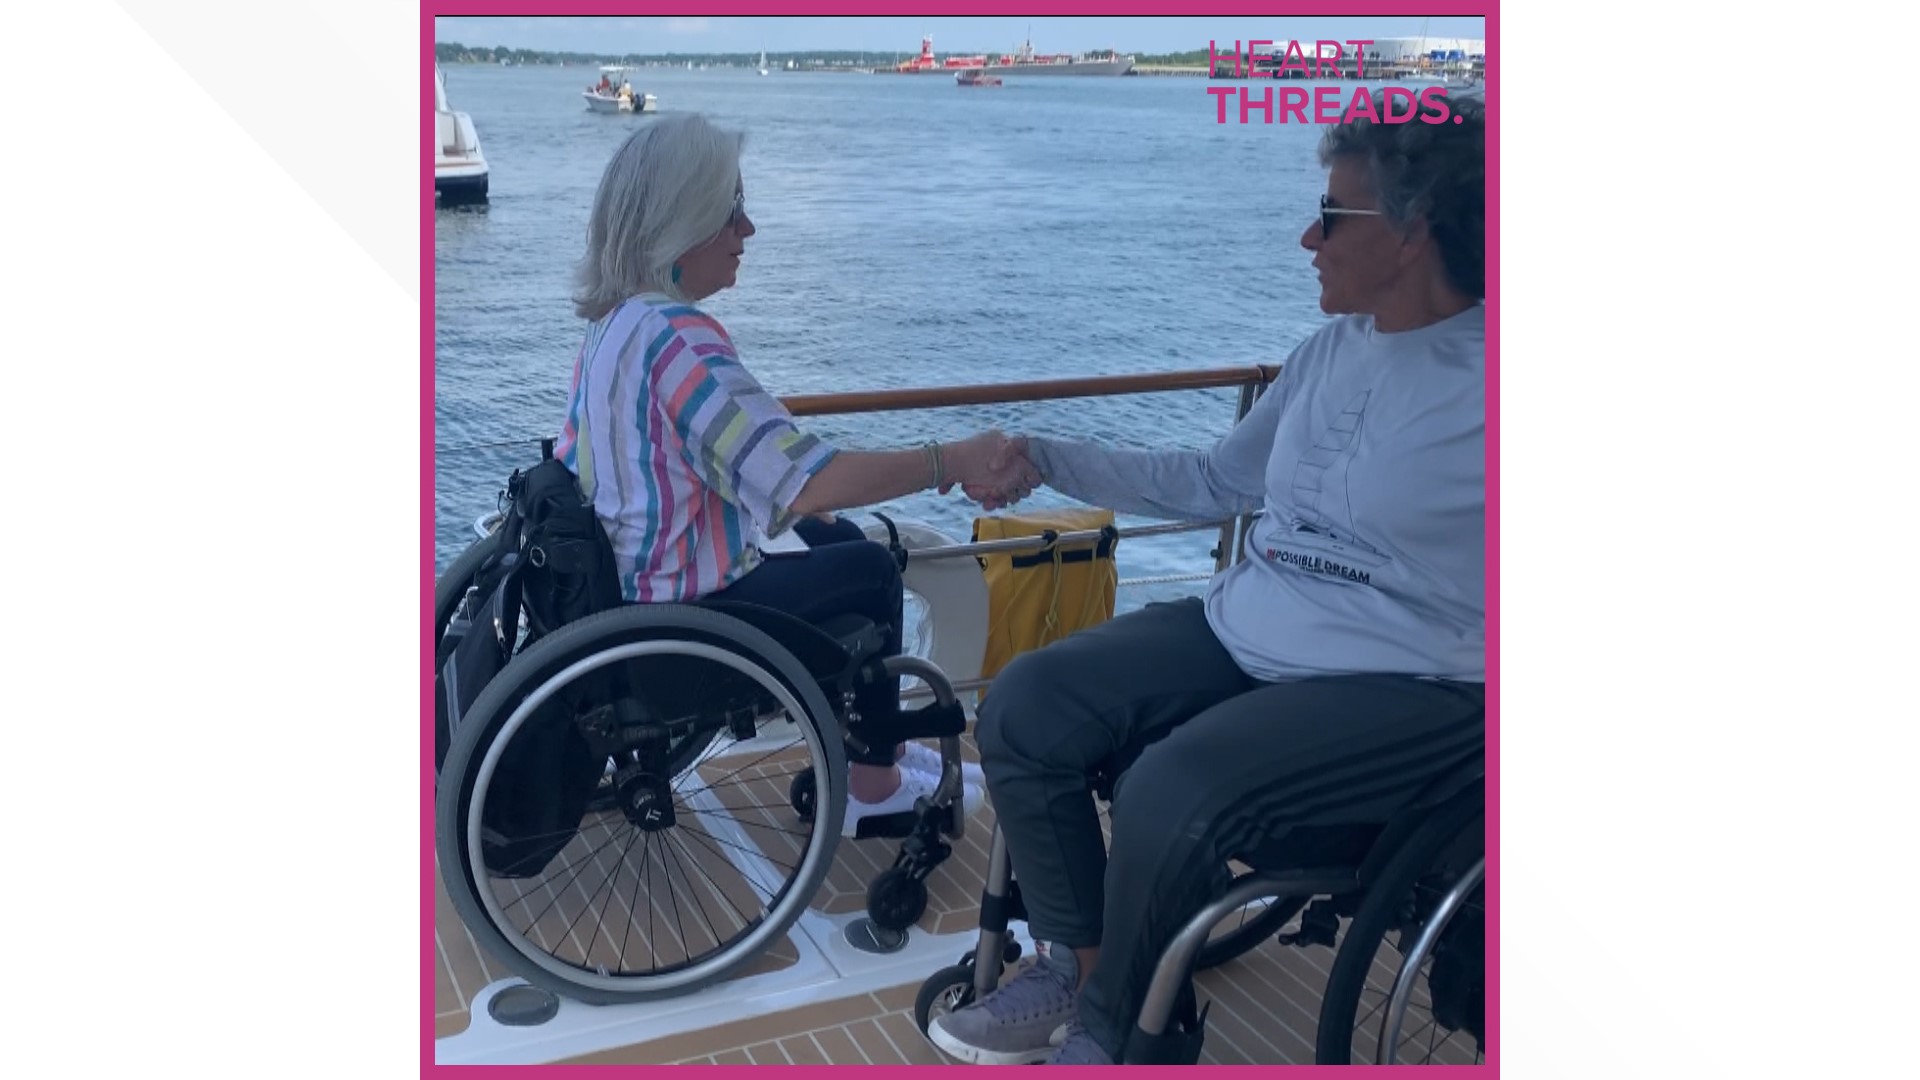 An accident confined Deborah Mellen to a wheelchair 30 years ago, so she created an accessible sailboat that she and others with mobility issues.